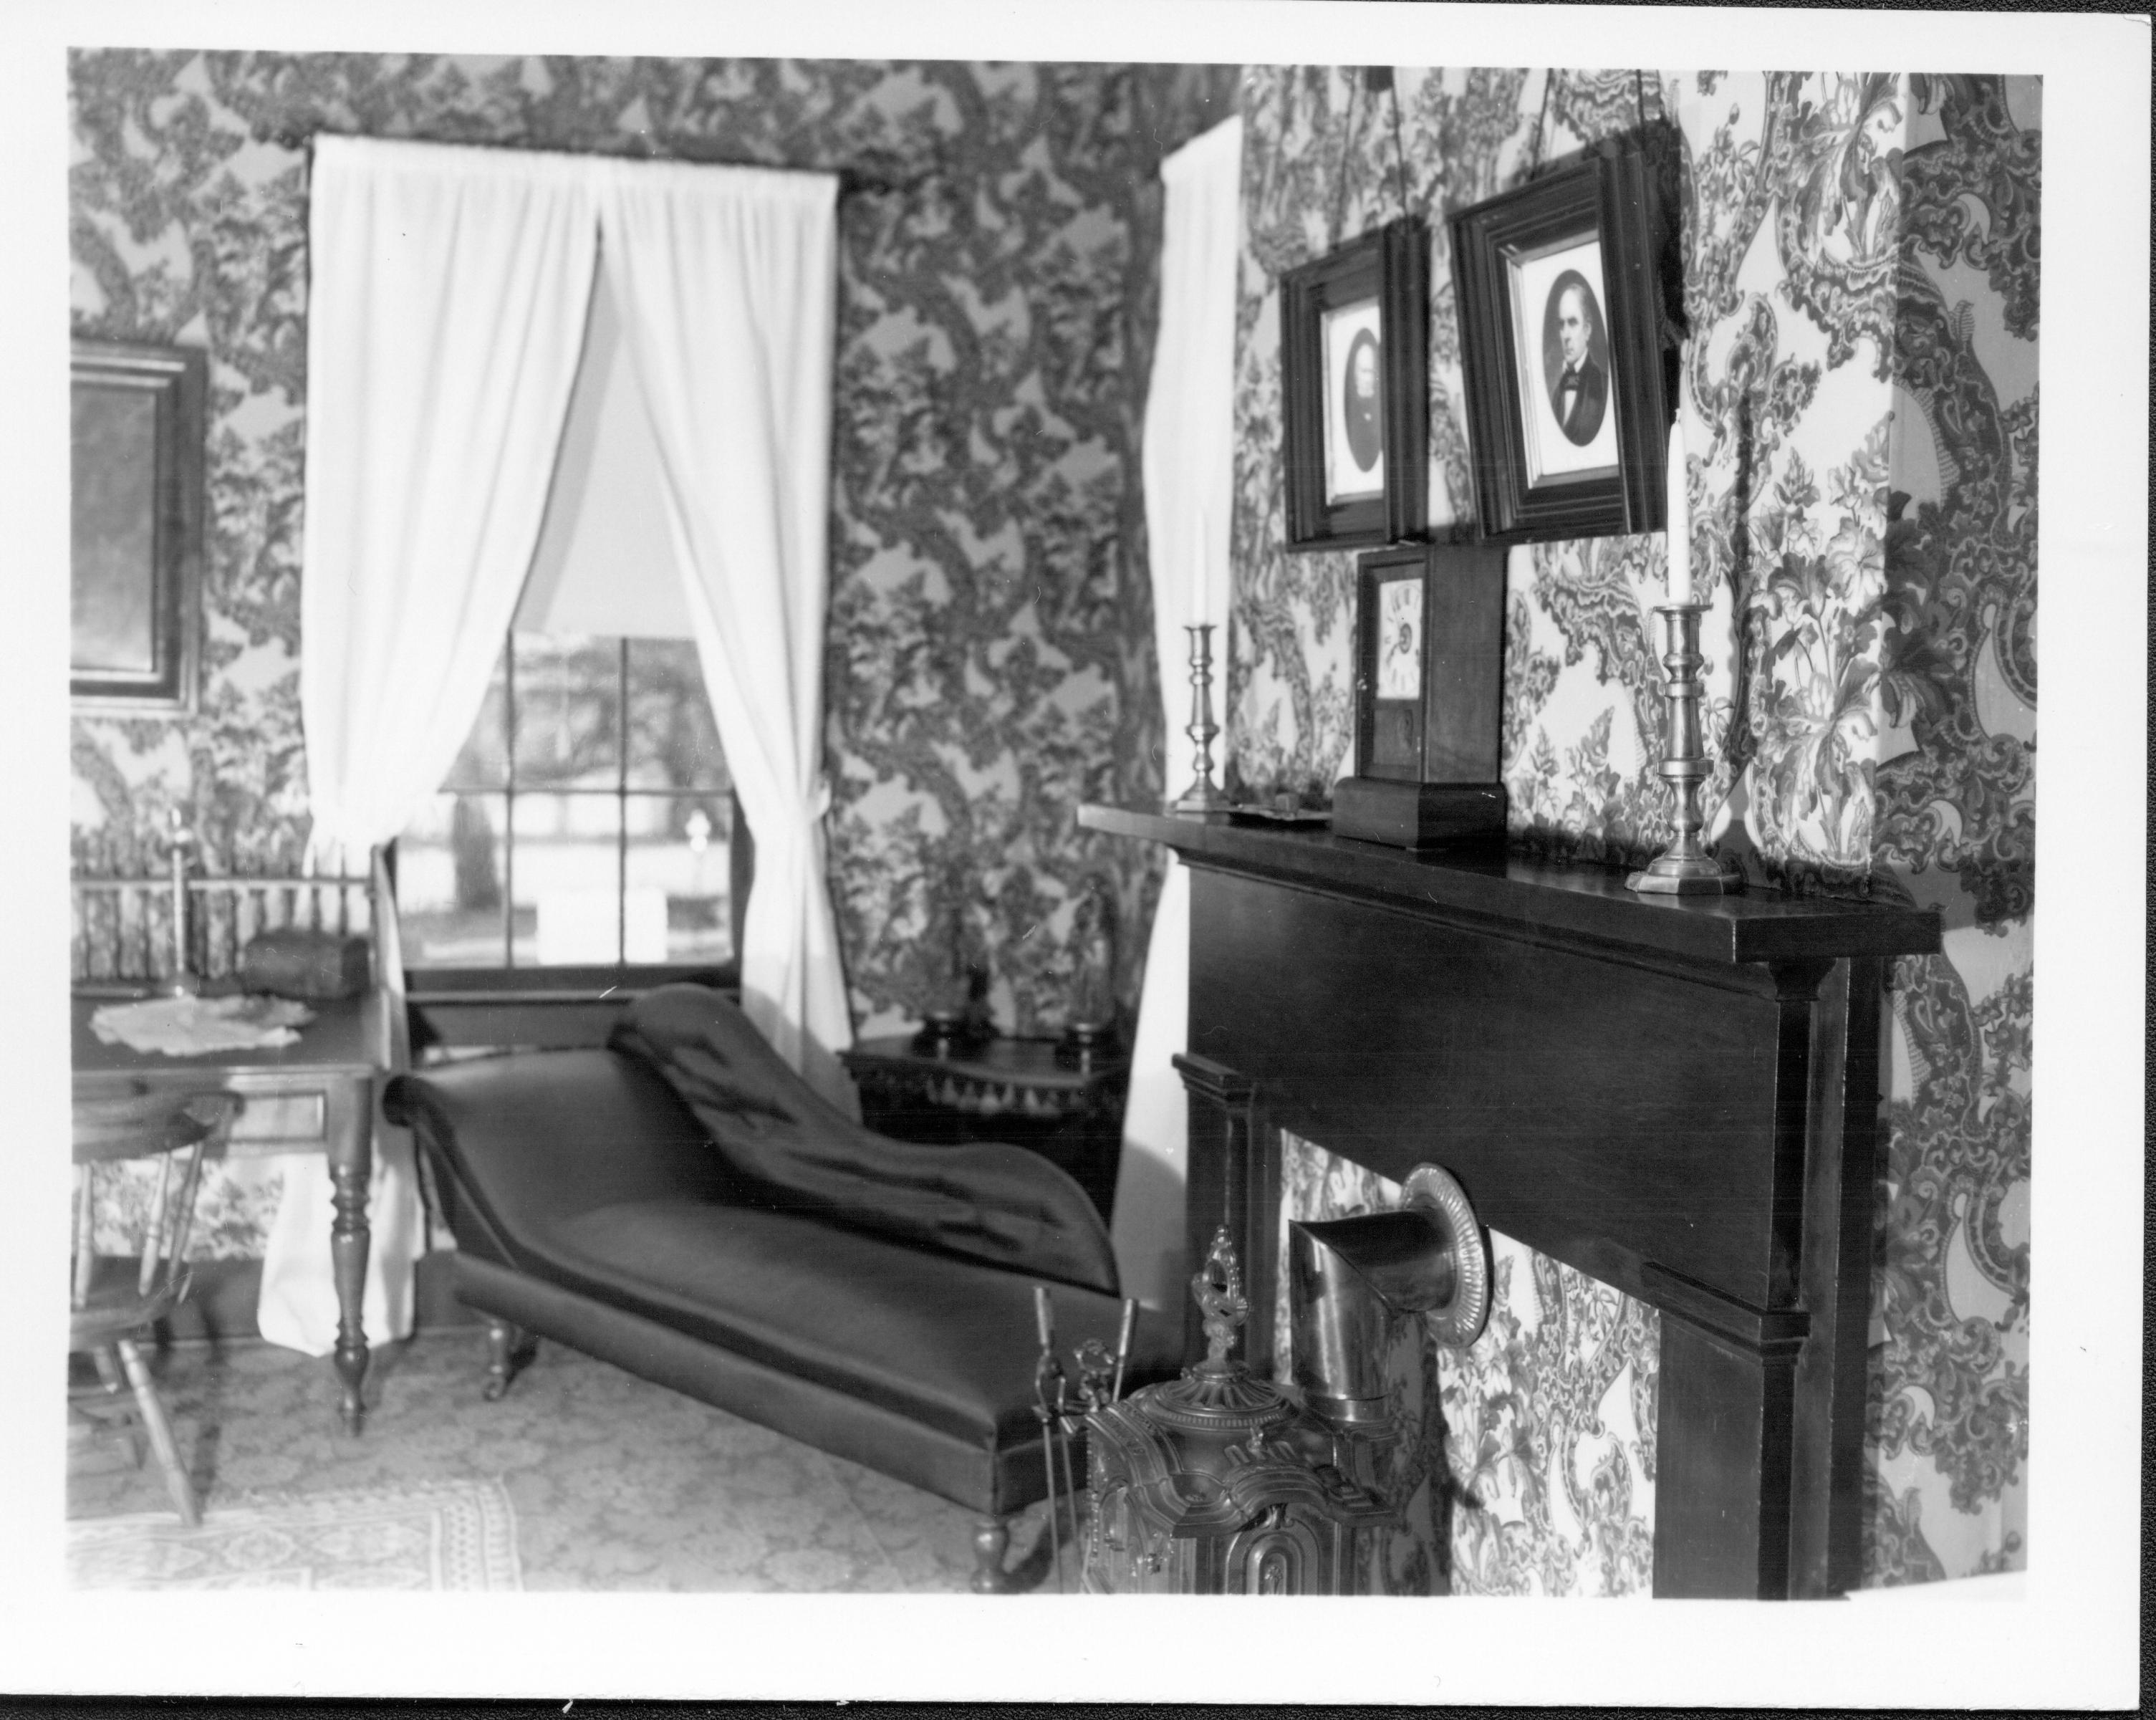 Spindle Desk - Lincoln's Home class 1, picture 23 Lincoln Home, Bedroom, fireplace, chaise lounge